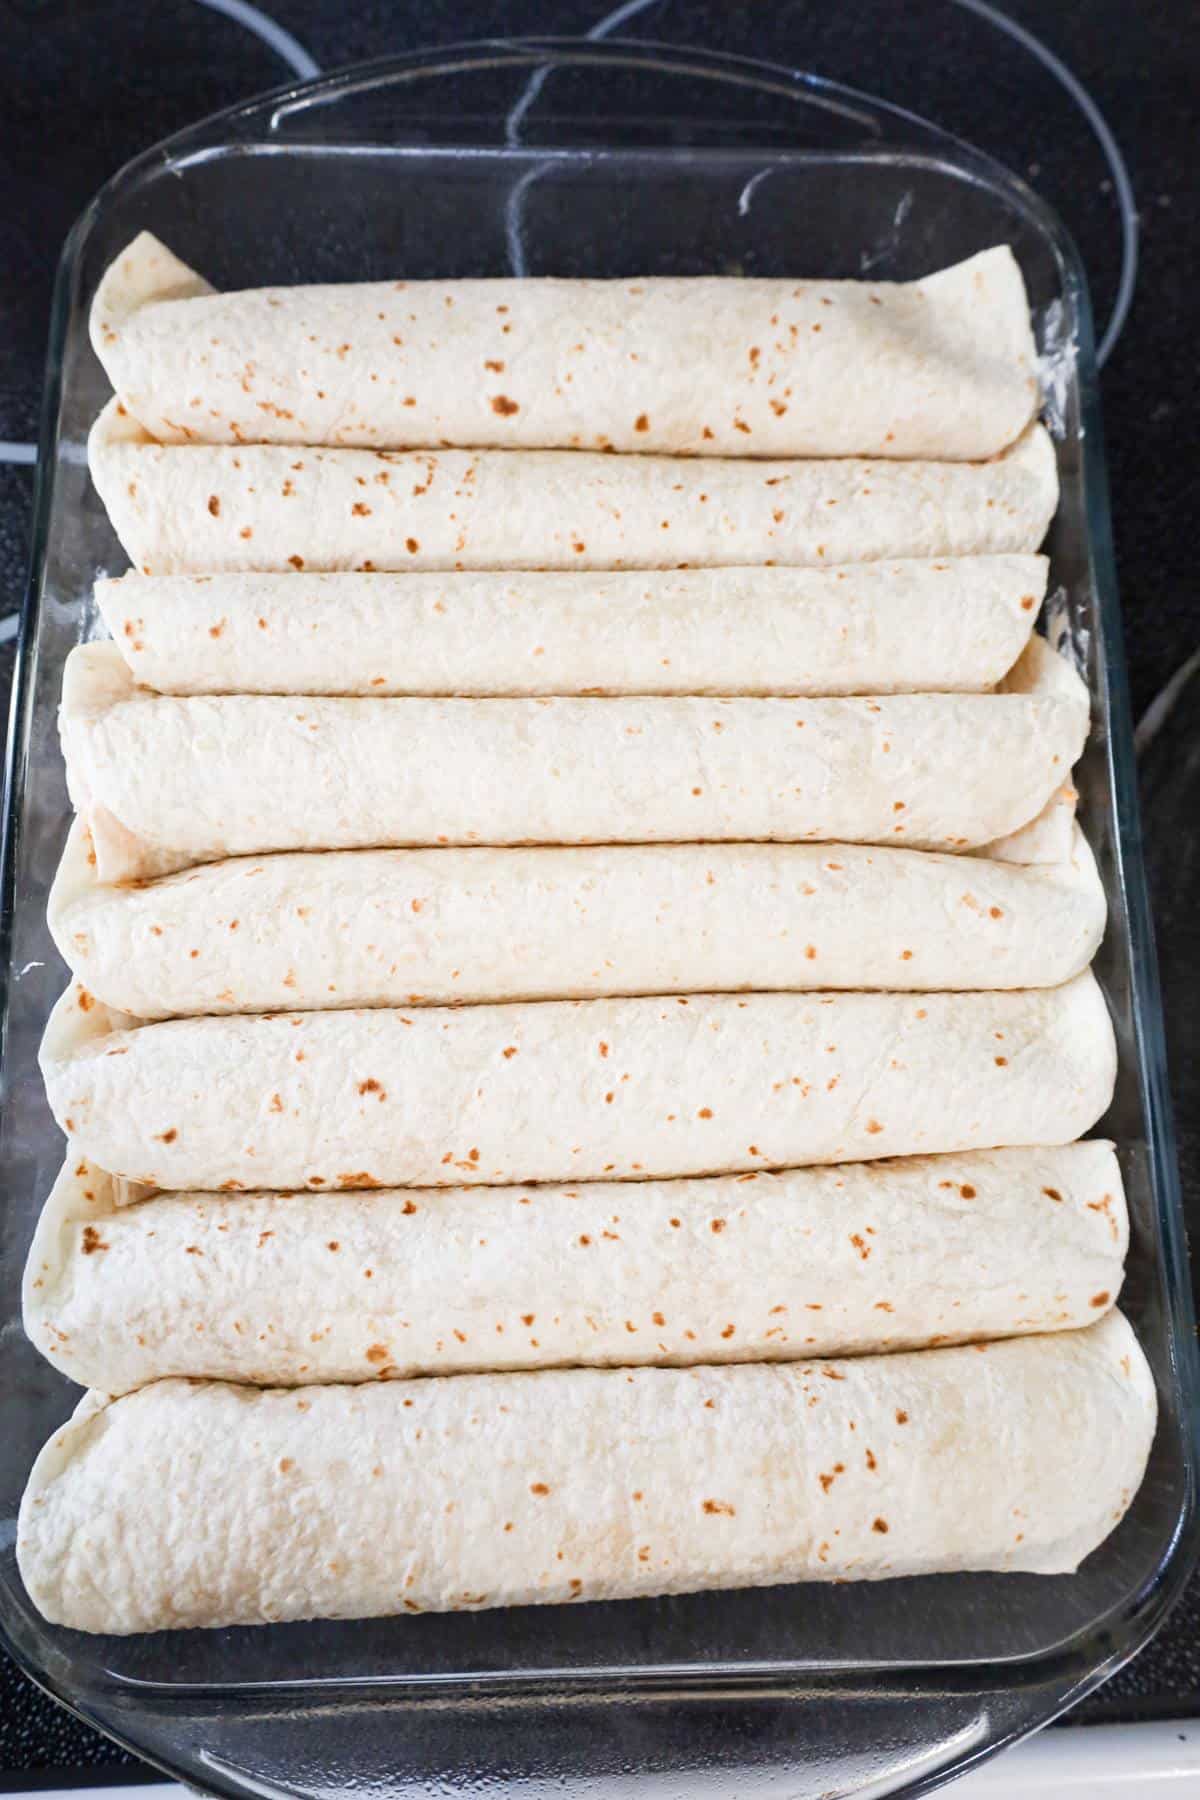 rolled up tortillas in a baking dish